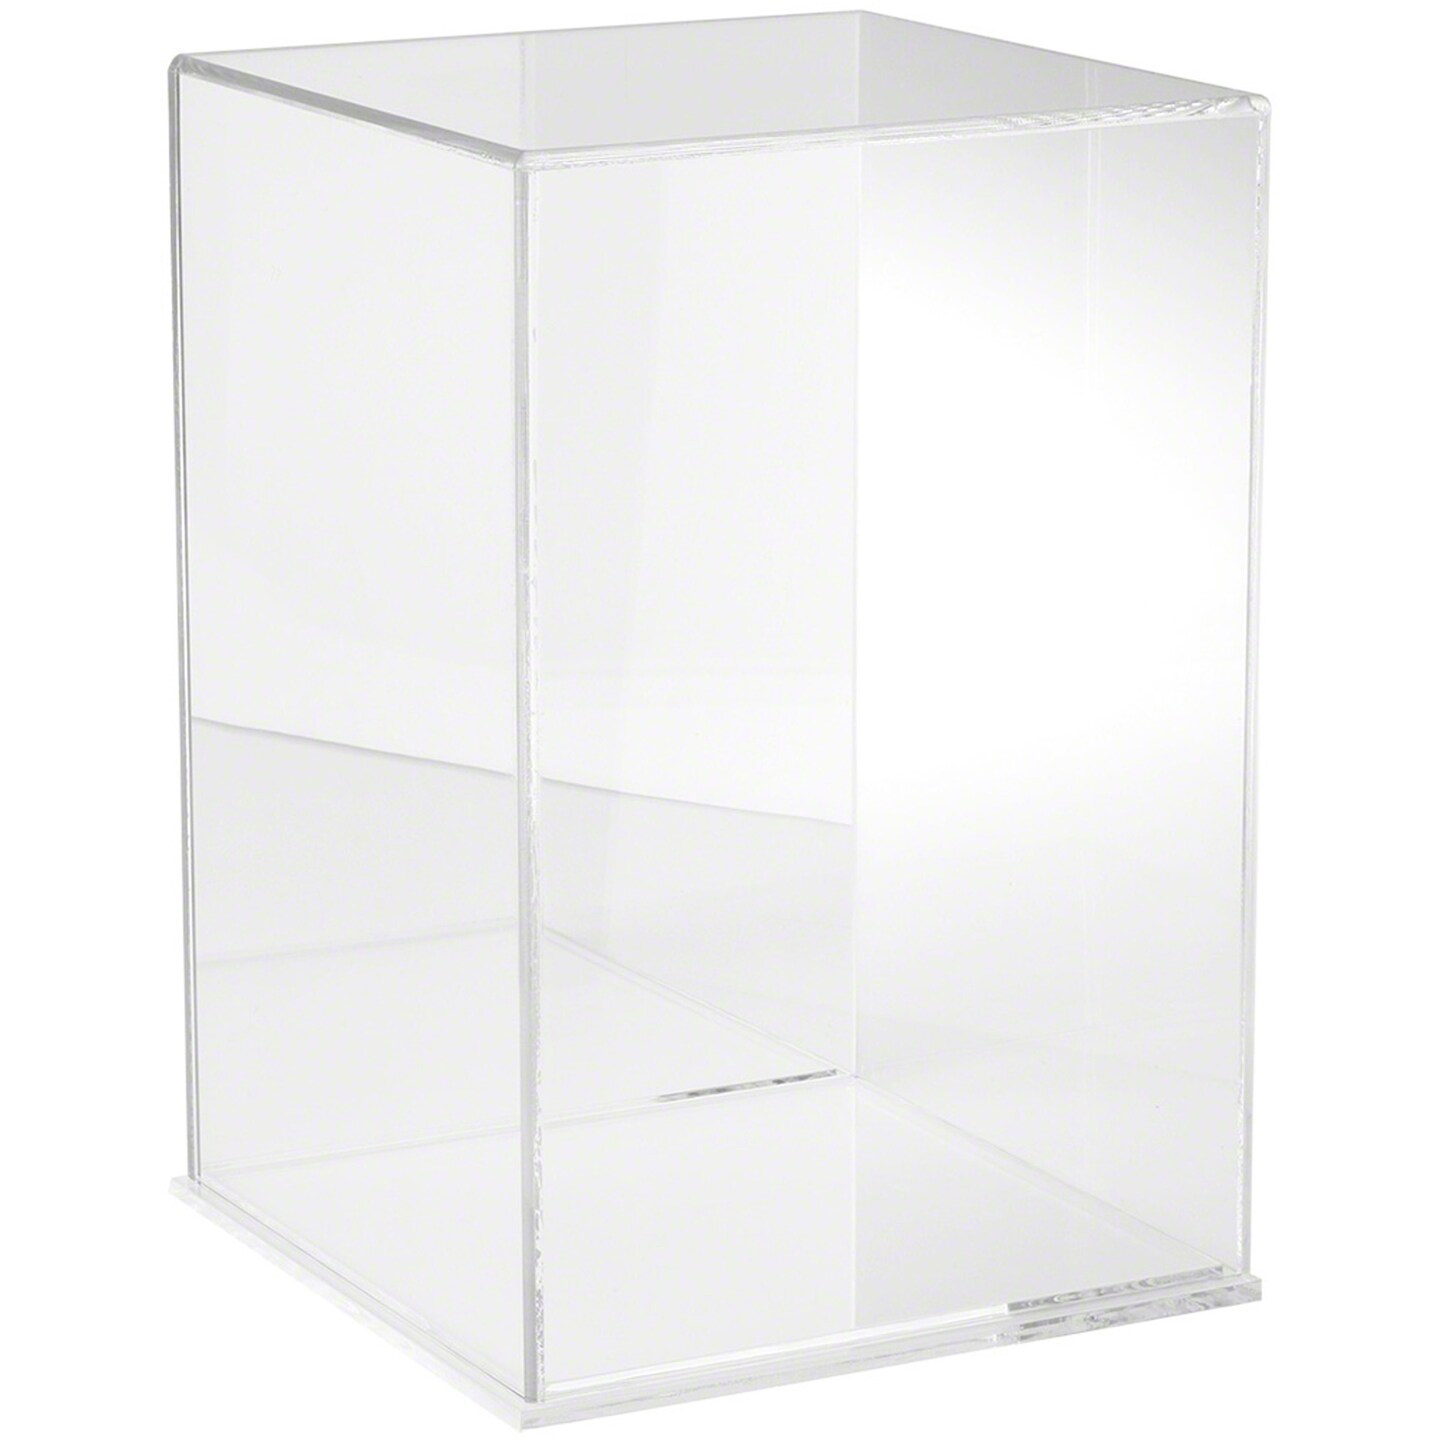 Display Cases & Domes - Finishing Products Online